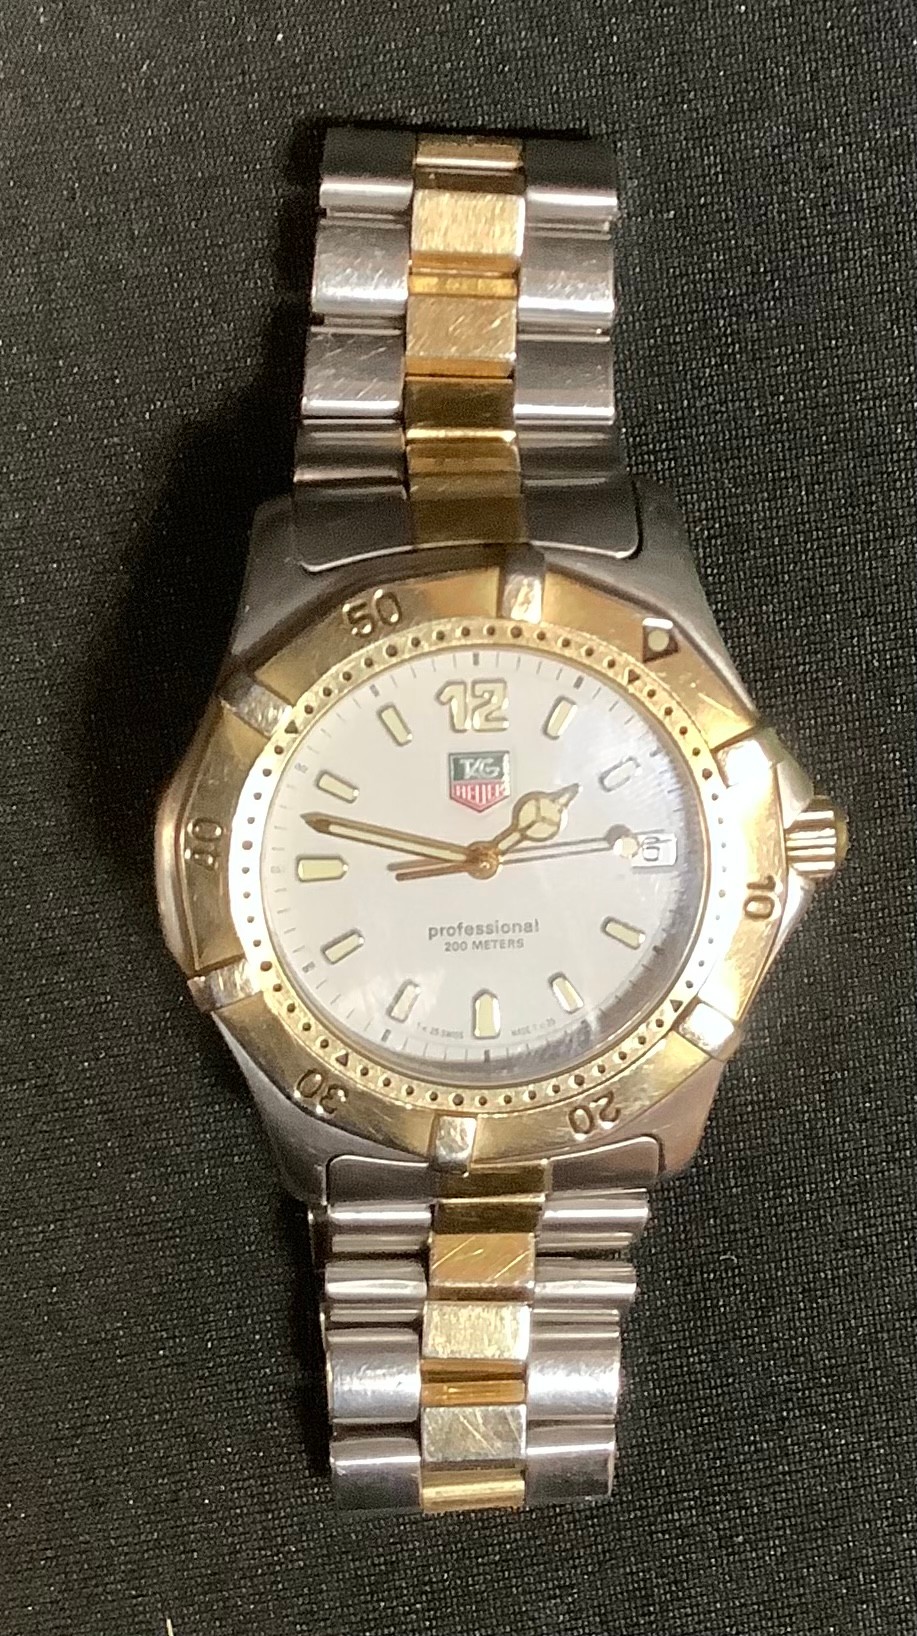 A Tag Heuer WK1120 professional 200 two tone steel cased wristwatch, serial no KY7972, cream dial,